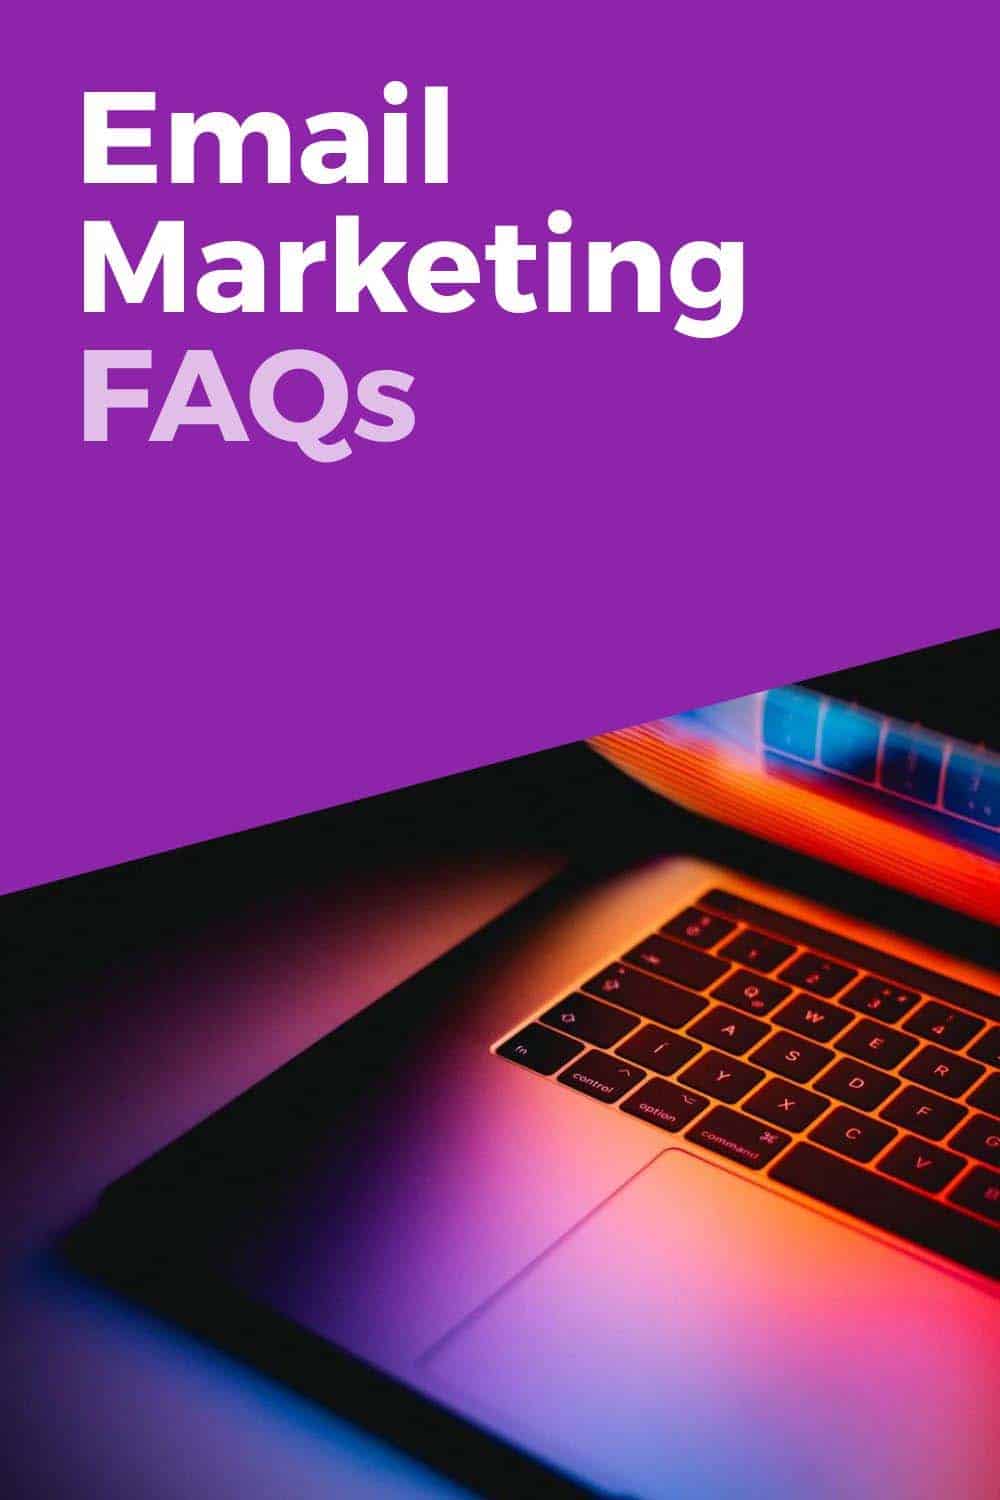 17 Email Marketing FAQs